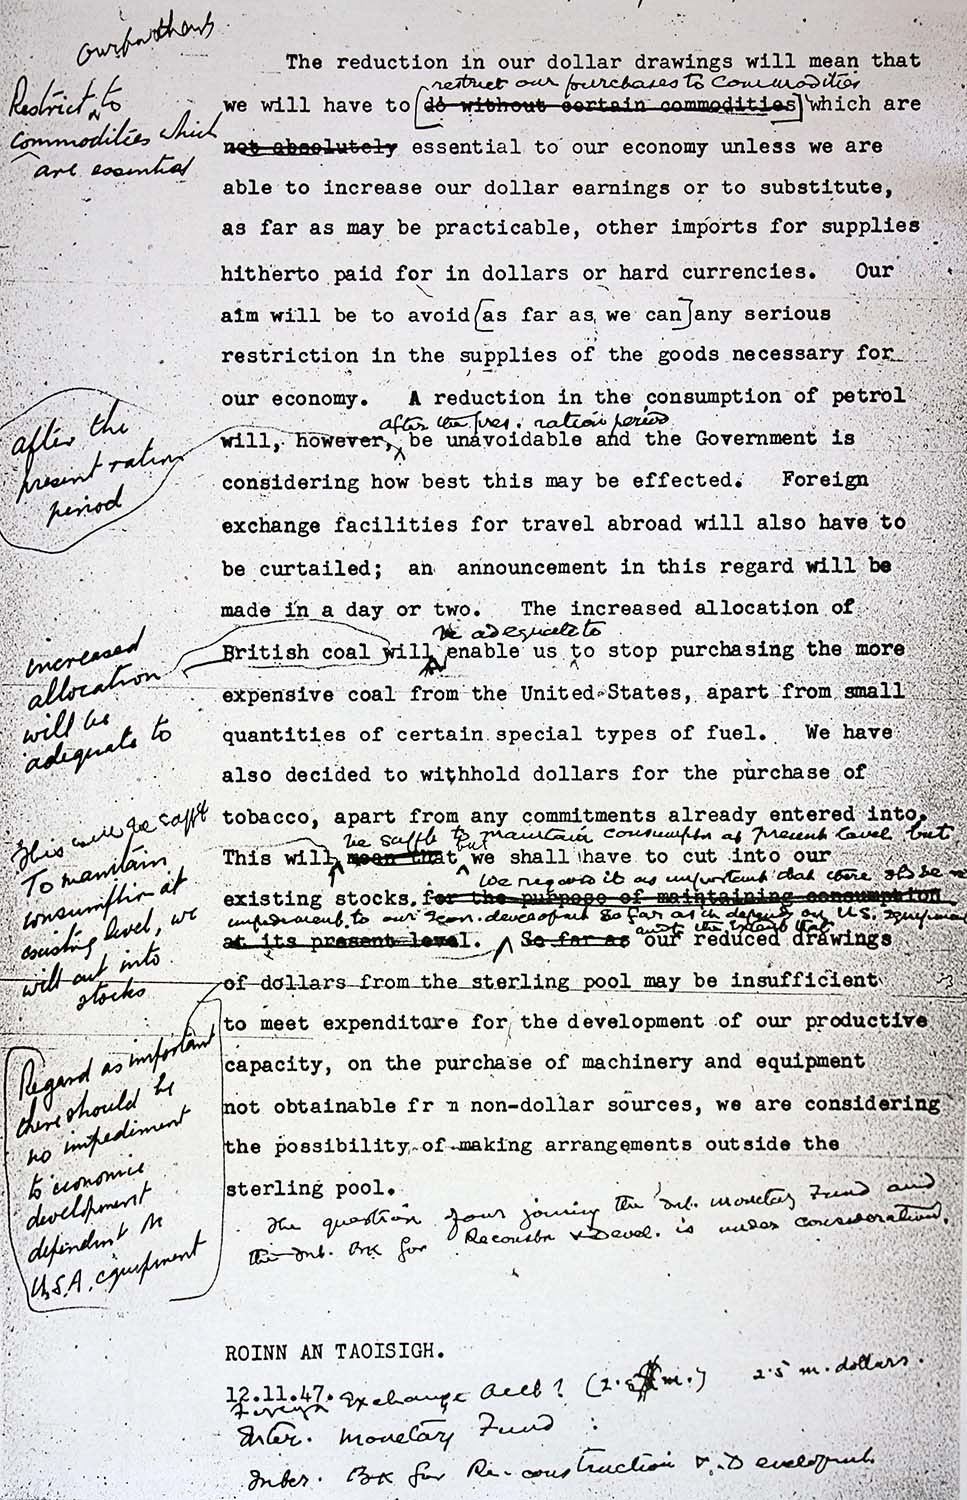 Facsimile reproduction of memorandum by the Department of the Taoiseach and the Department of Finance on Ireland's dollar requirements
with edits and marginal notes by Éamon de Valera and Seán Lemass